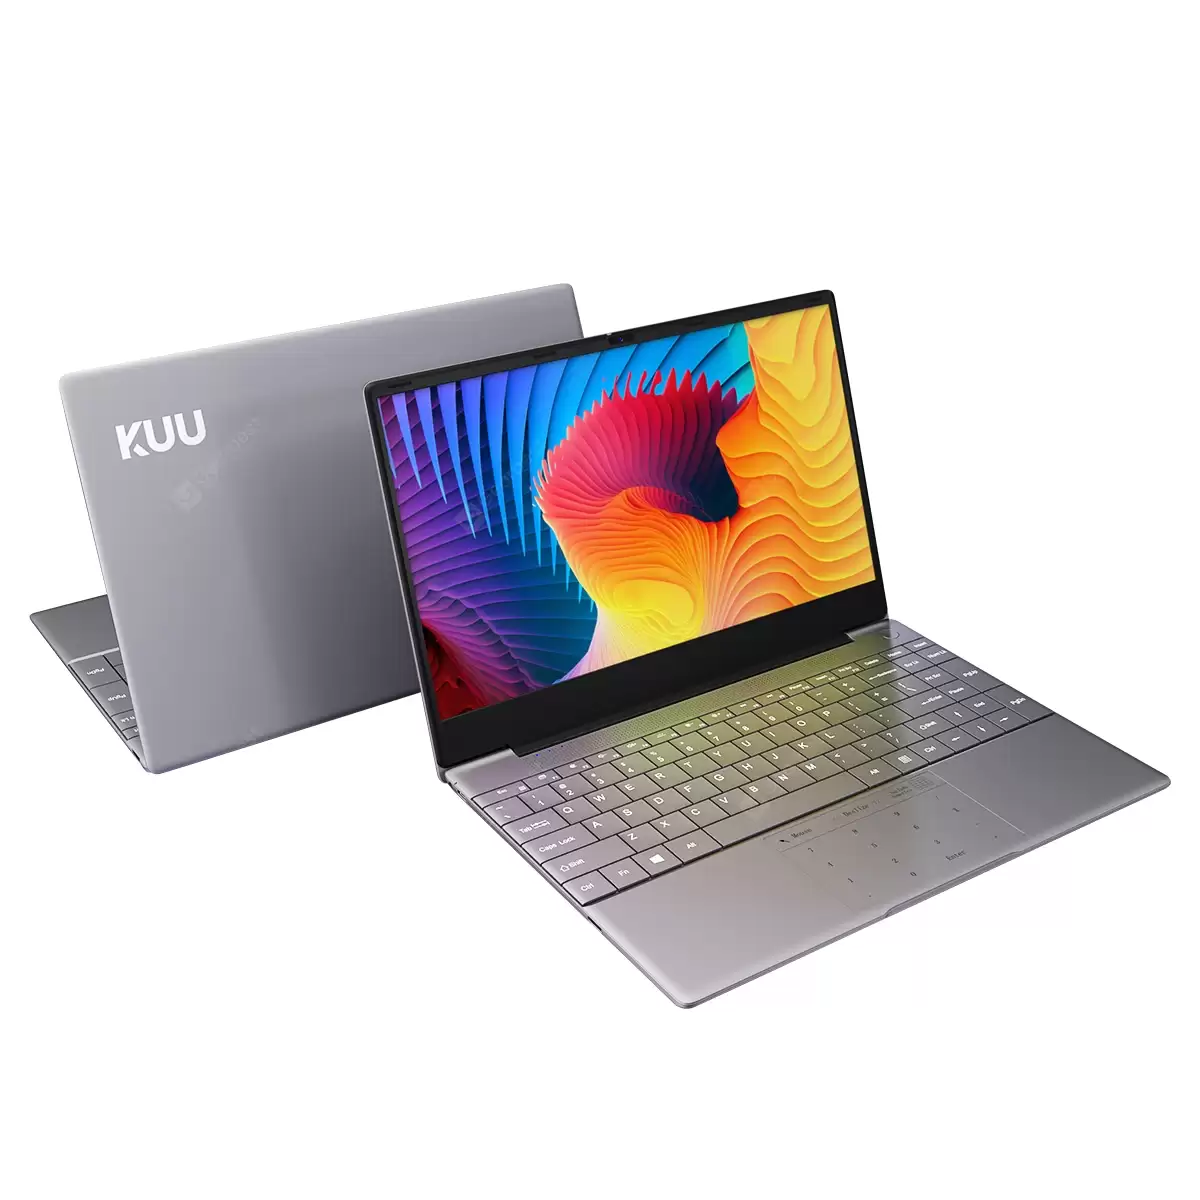 Order In Just $385.68 Kuu K2s Intel Celeron J4115 Processor 14.1-inch Ips Screen All Metal Shell Office Notebook 8gb Ram Windows 10 128gb/256gb/512gb Ssd - 256gb China At Gearbest With This Coupon